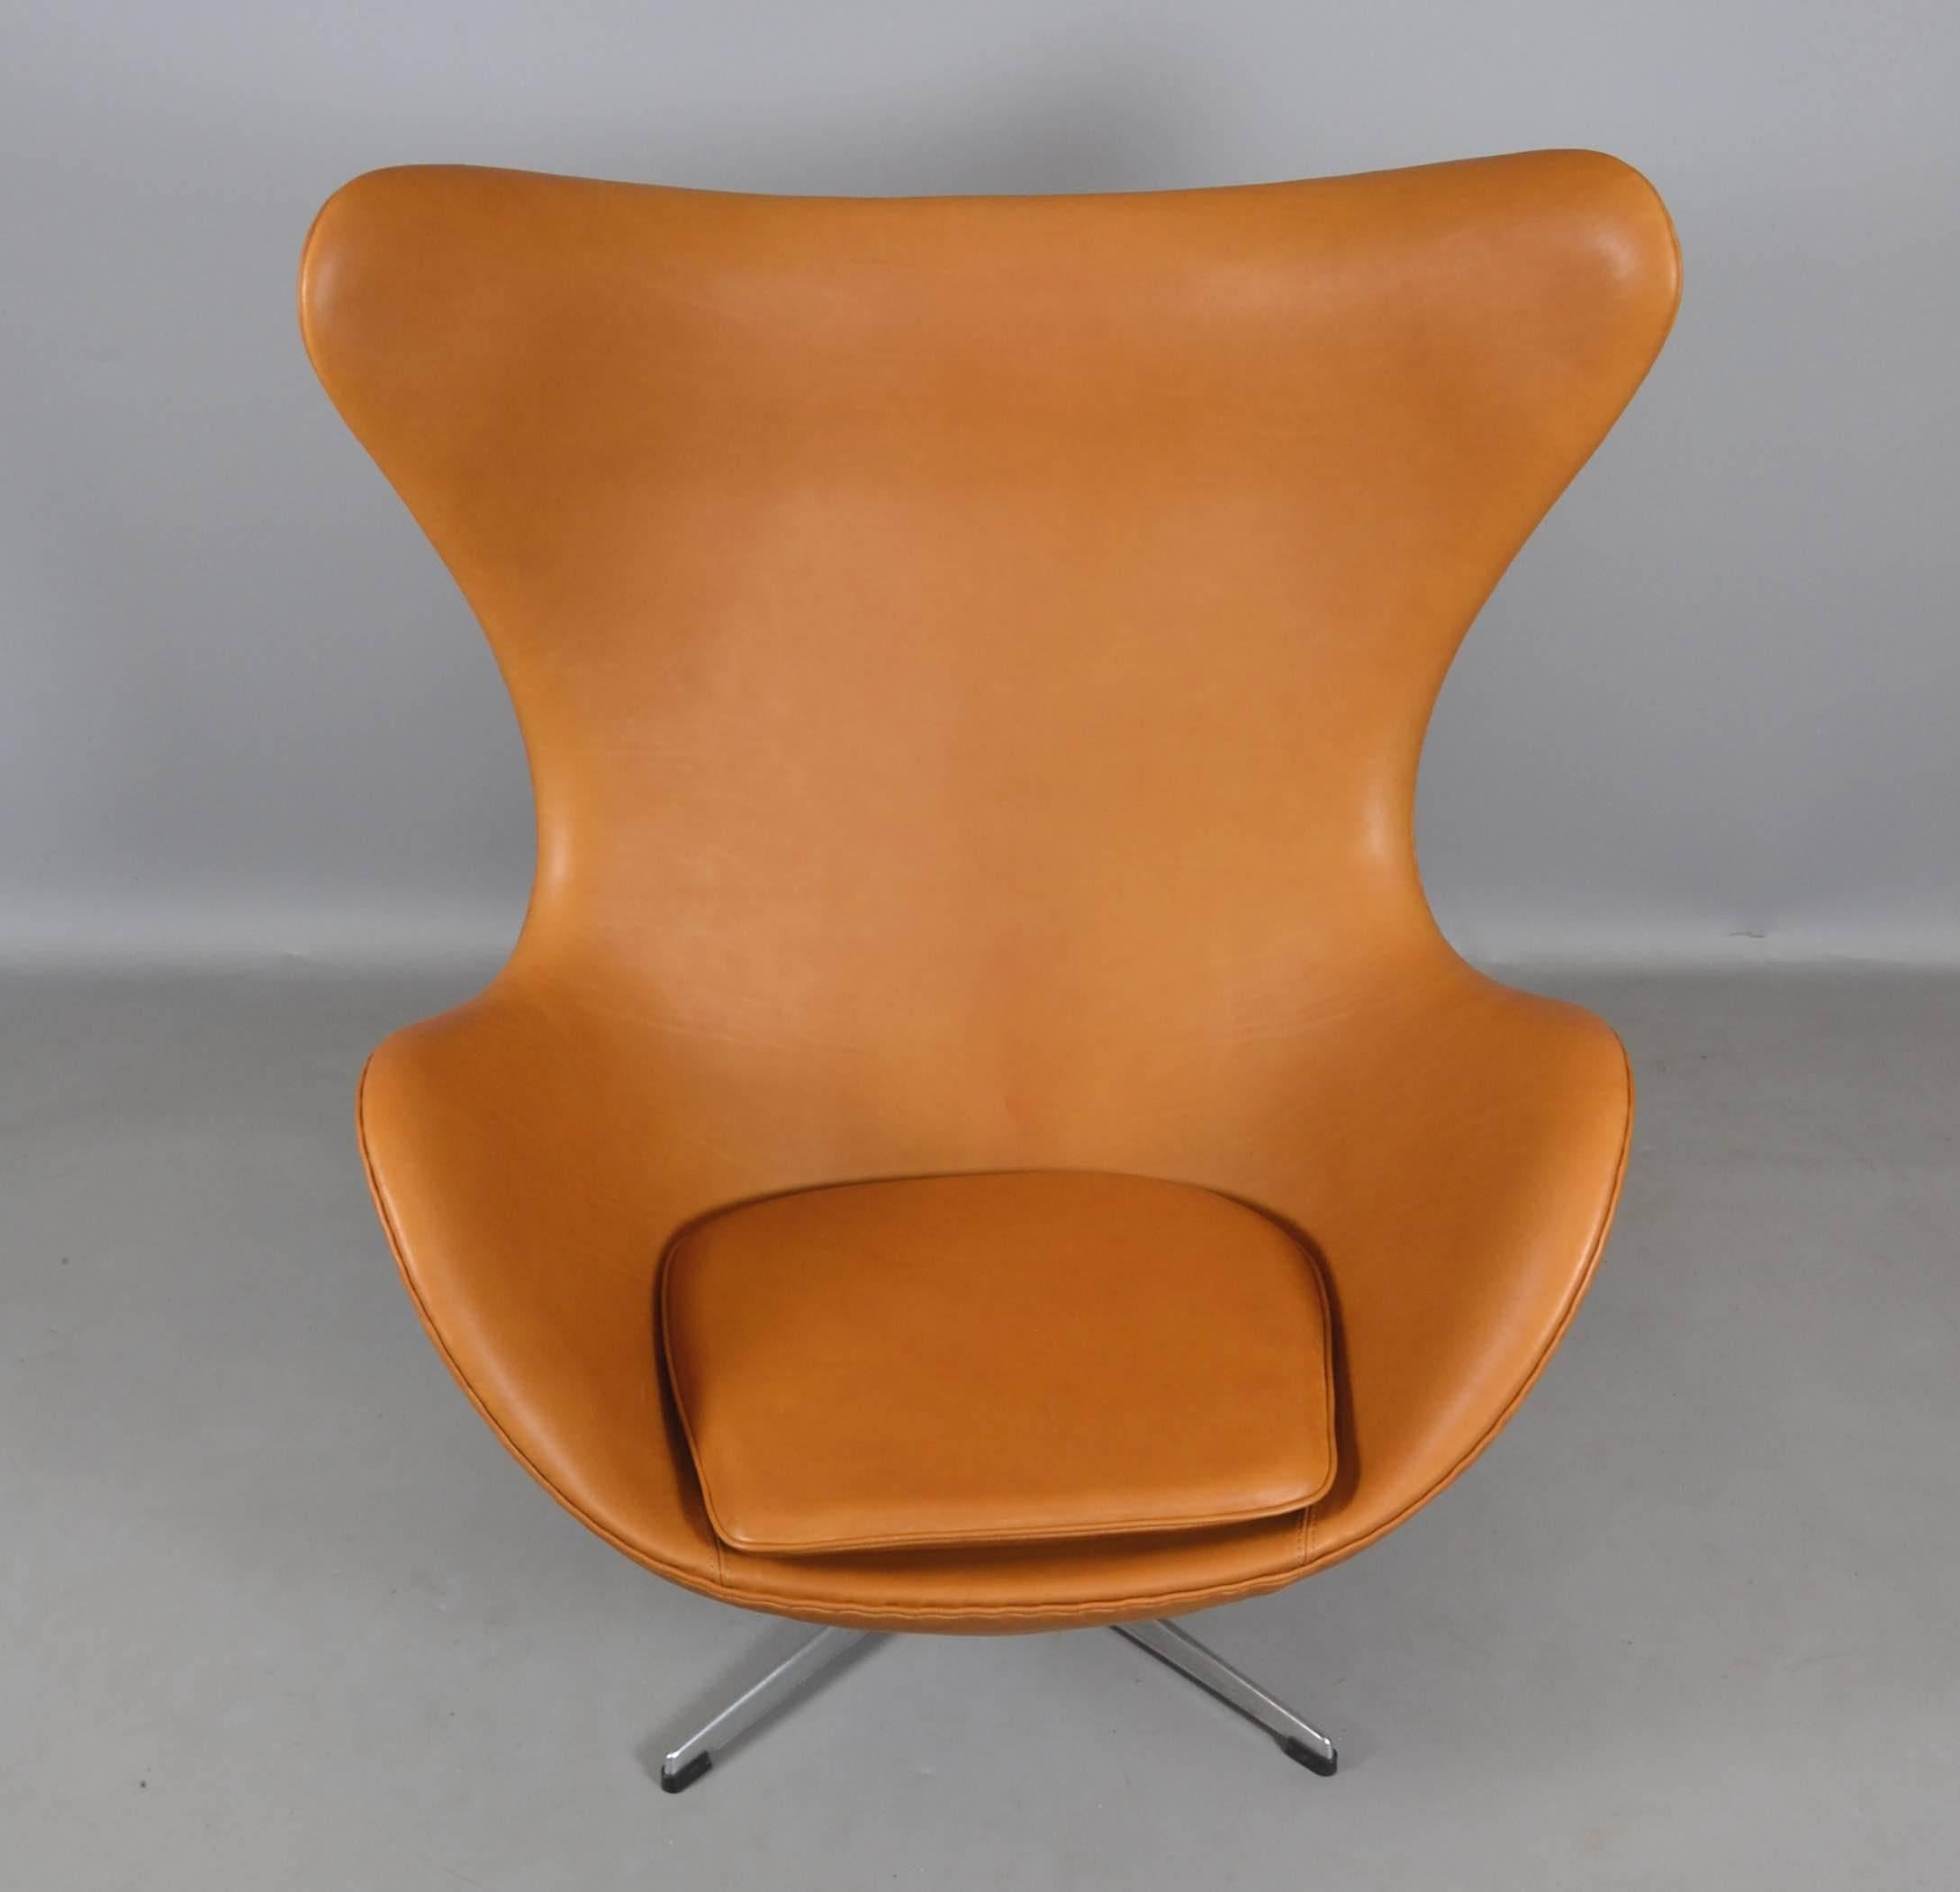 Designed by Arne Jacobsen in 1958, produced by Fritz Hansem, circa 1970. Original chair from the first production with brand new cognac aniline leather.